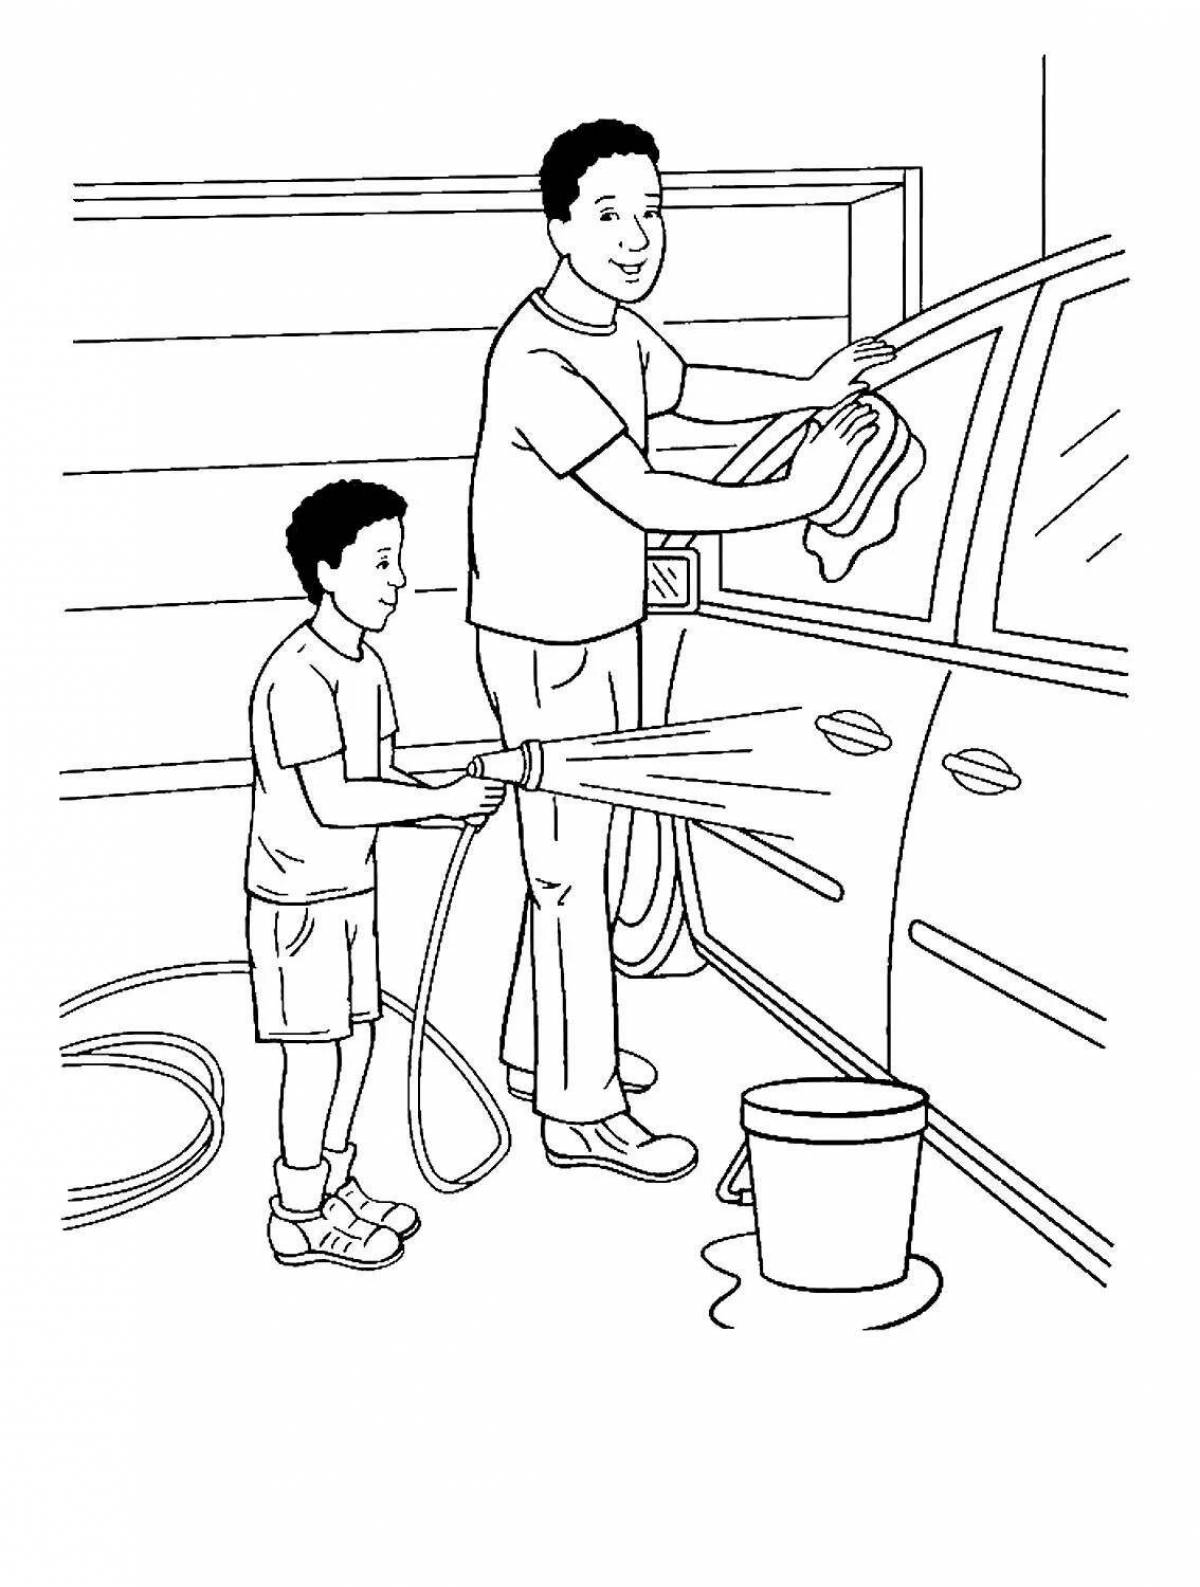 Delightful coloring book to help parents